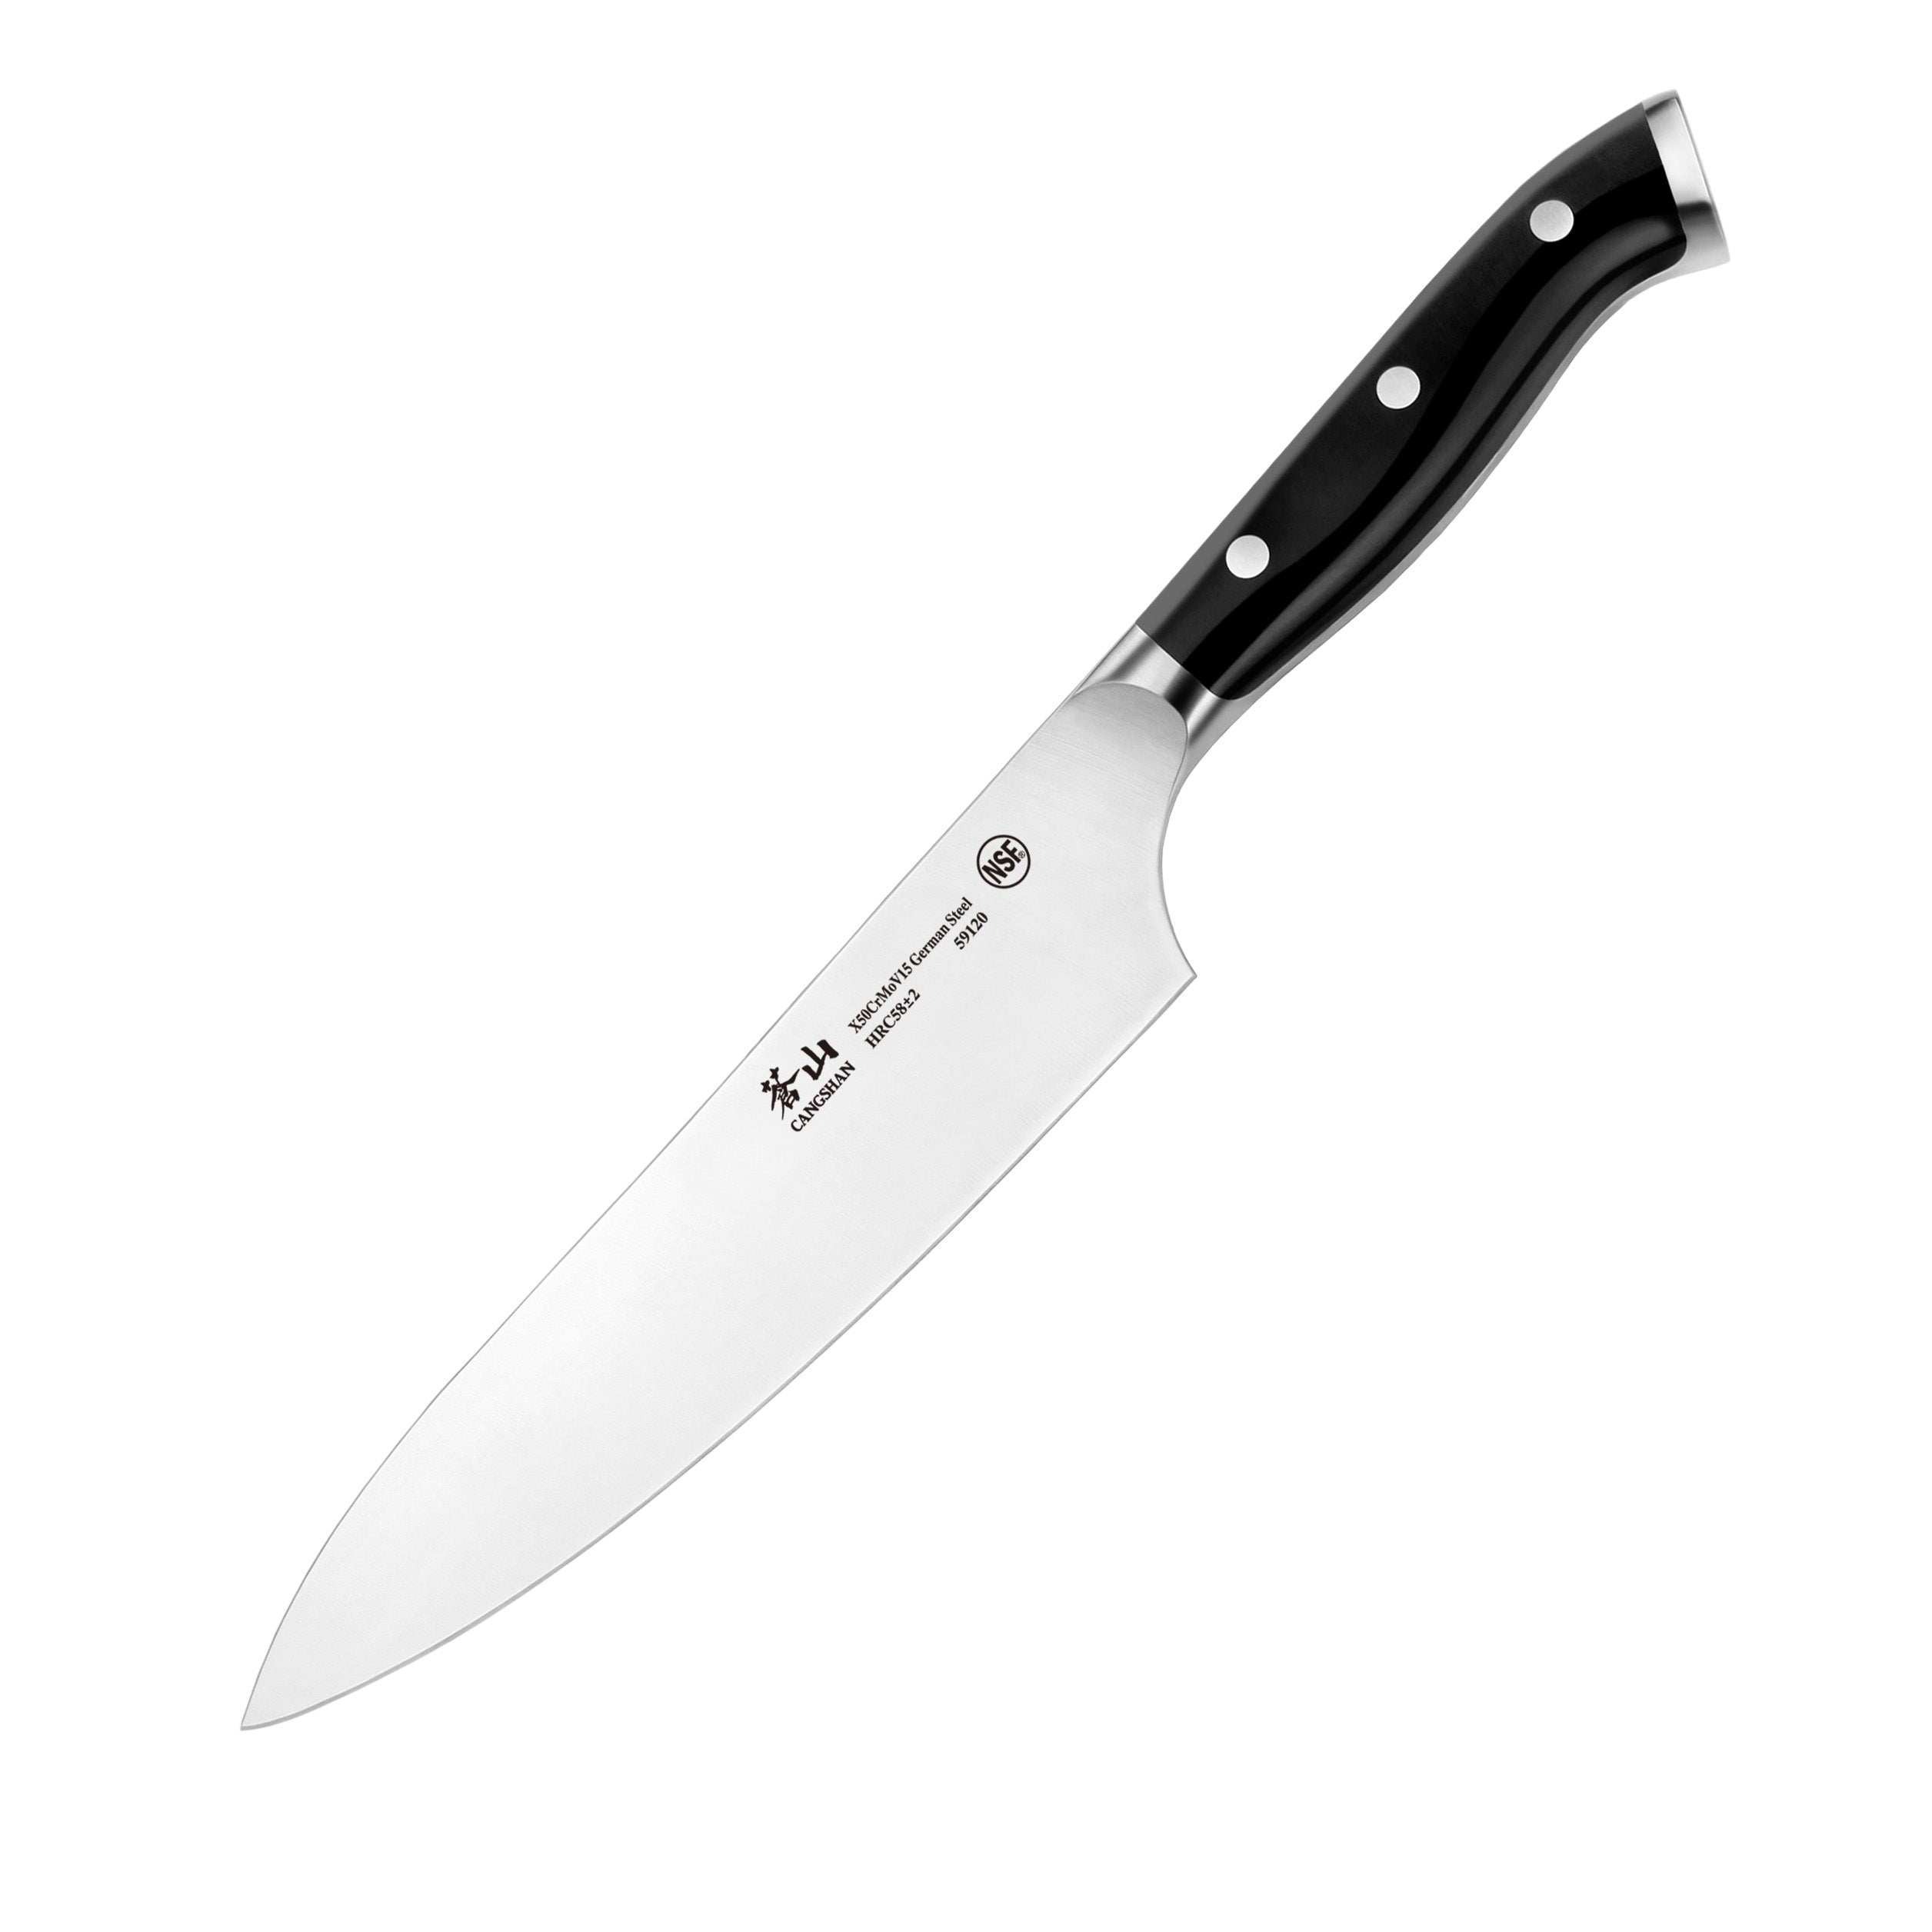 Kitchen Knife, Classic 8” Chef's Knife, German EN1.4116 Stainless